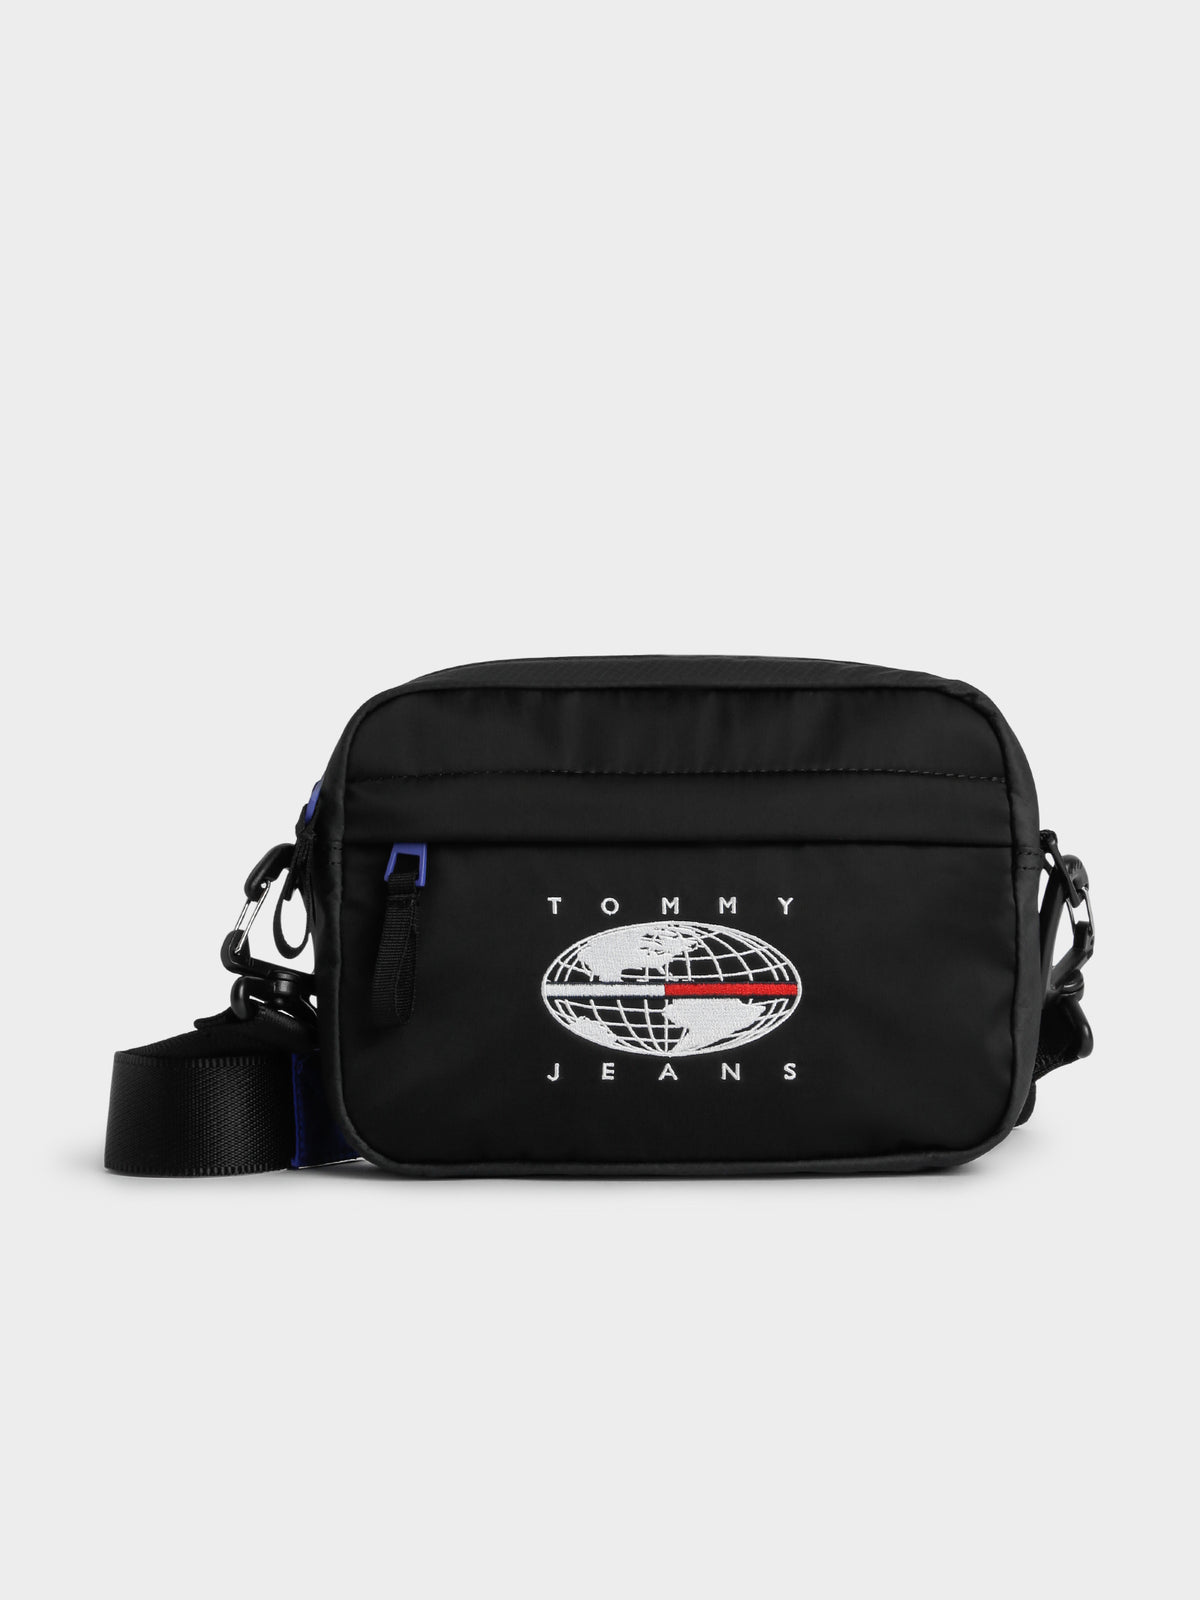 Expedition Crossover Body Bag in Back